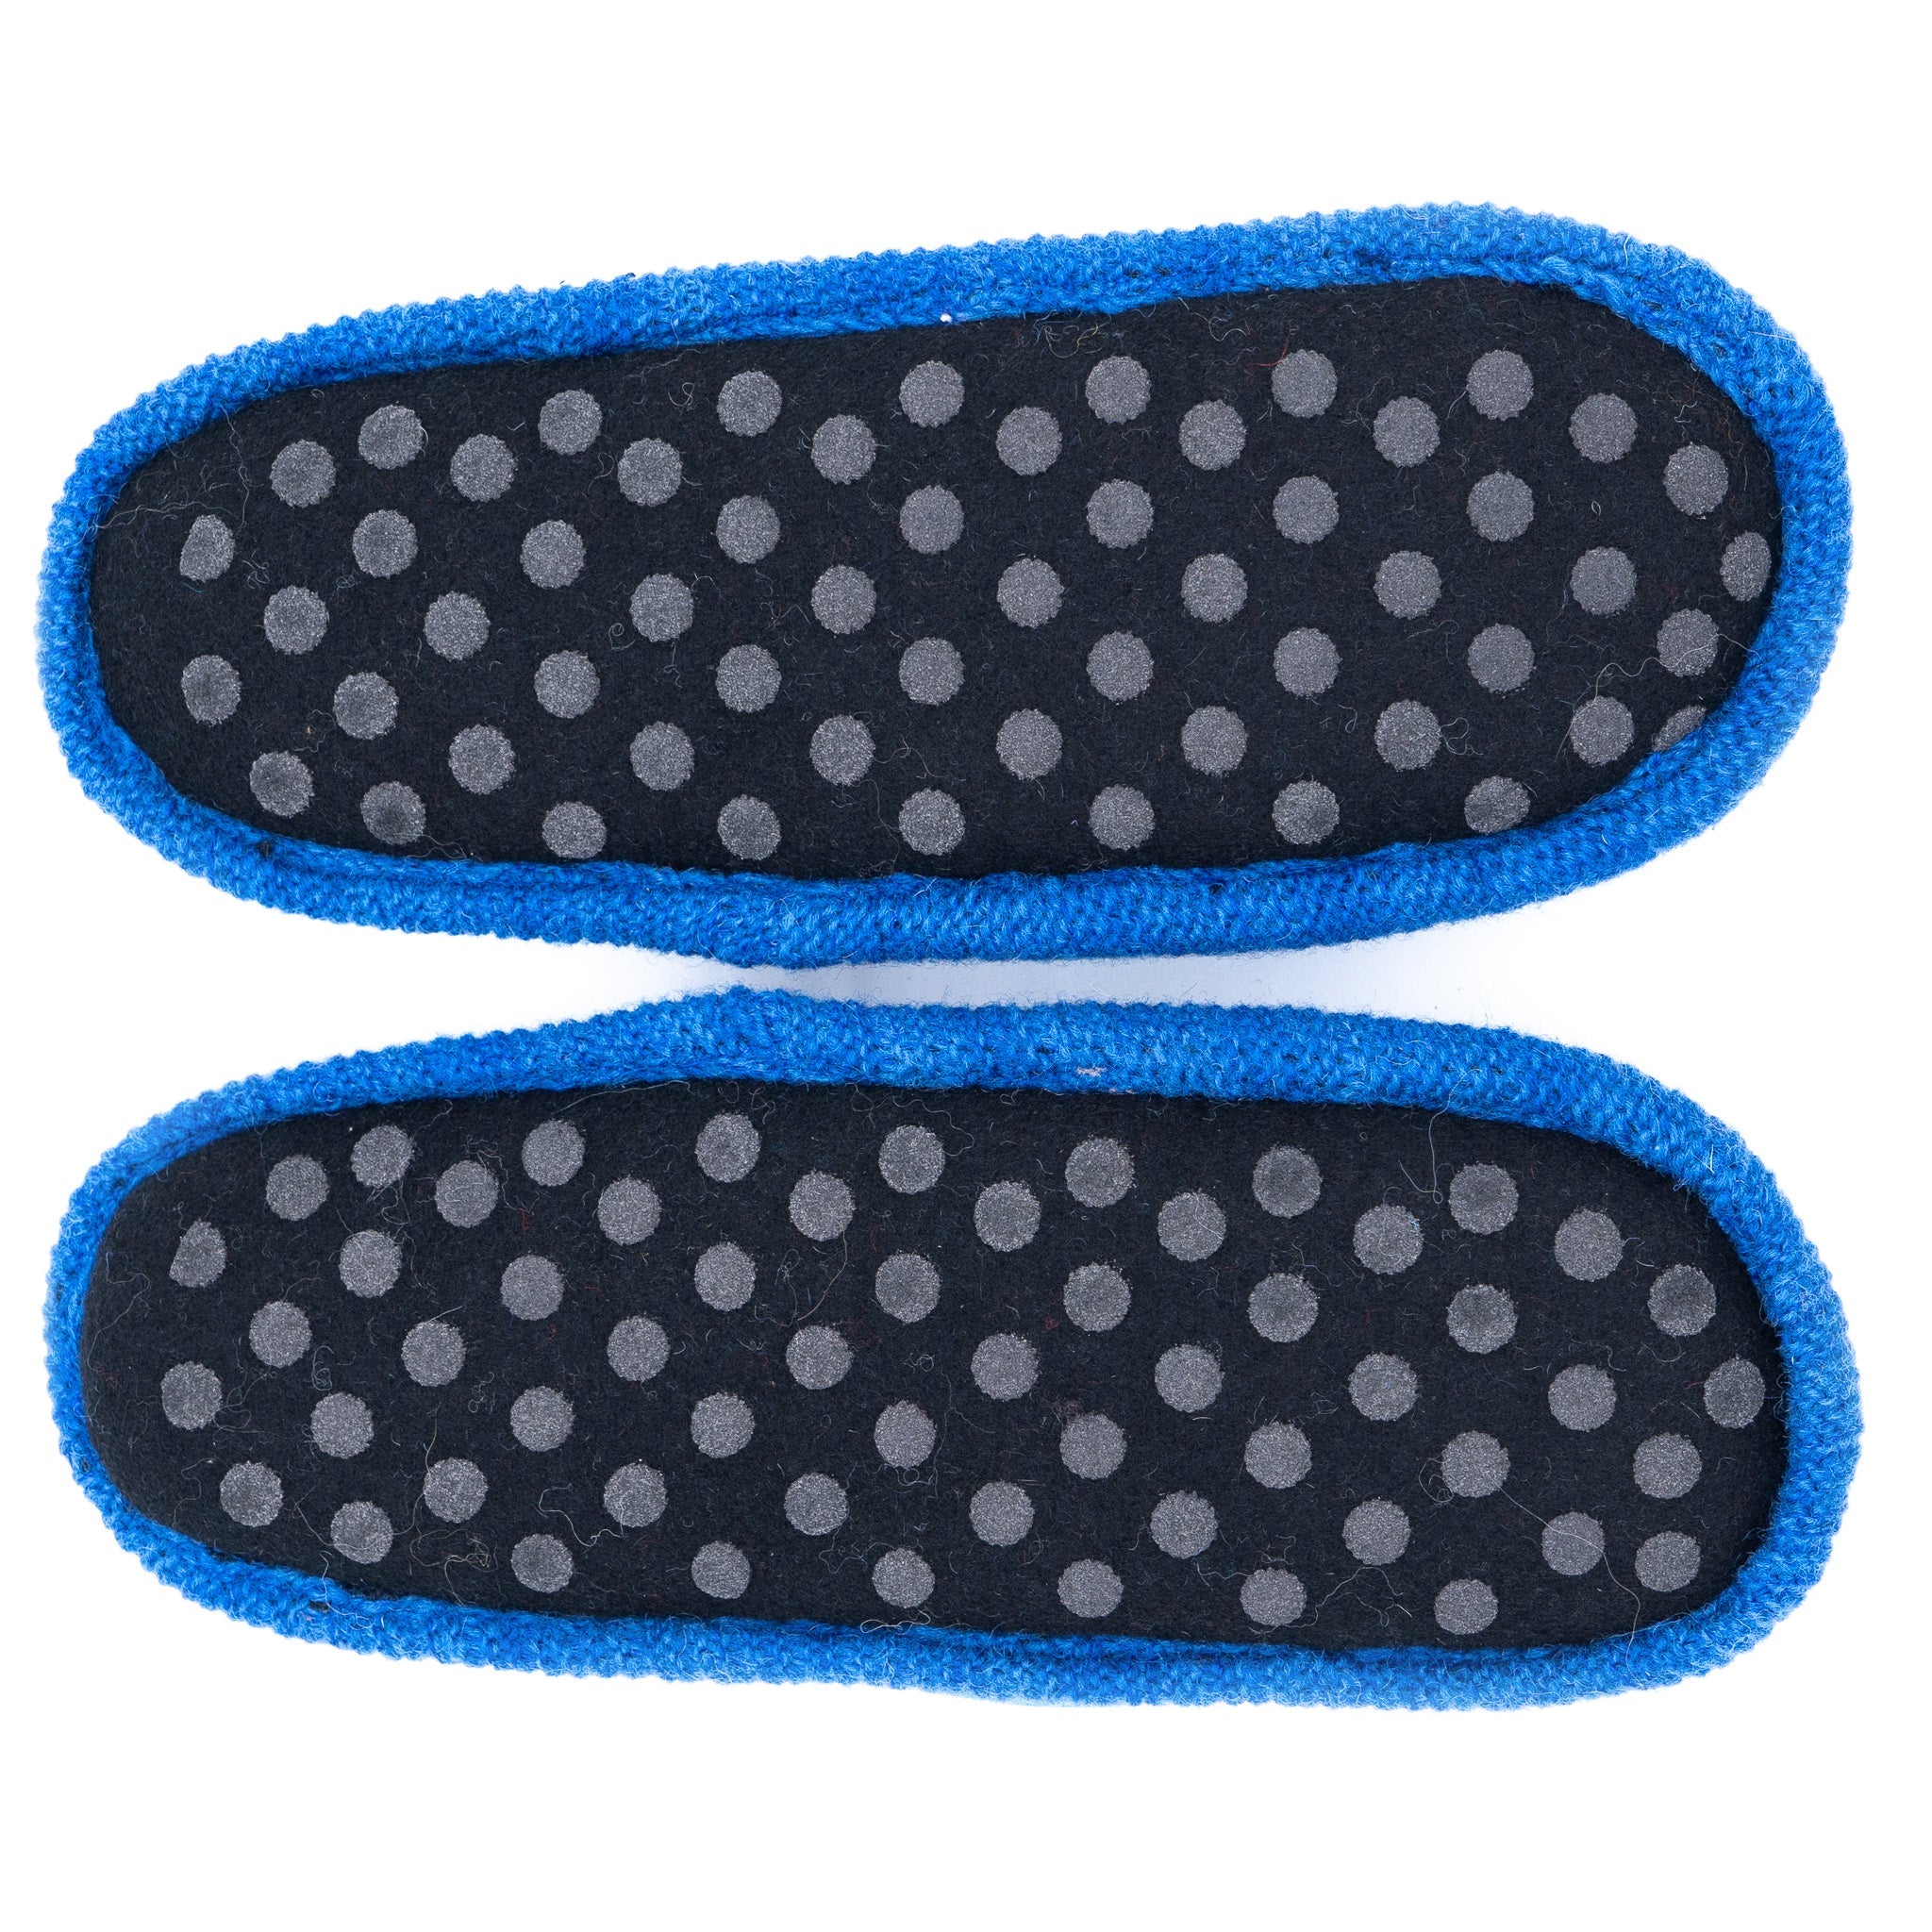 Wool Felt House Slippers With Non Slip Soles